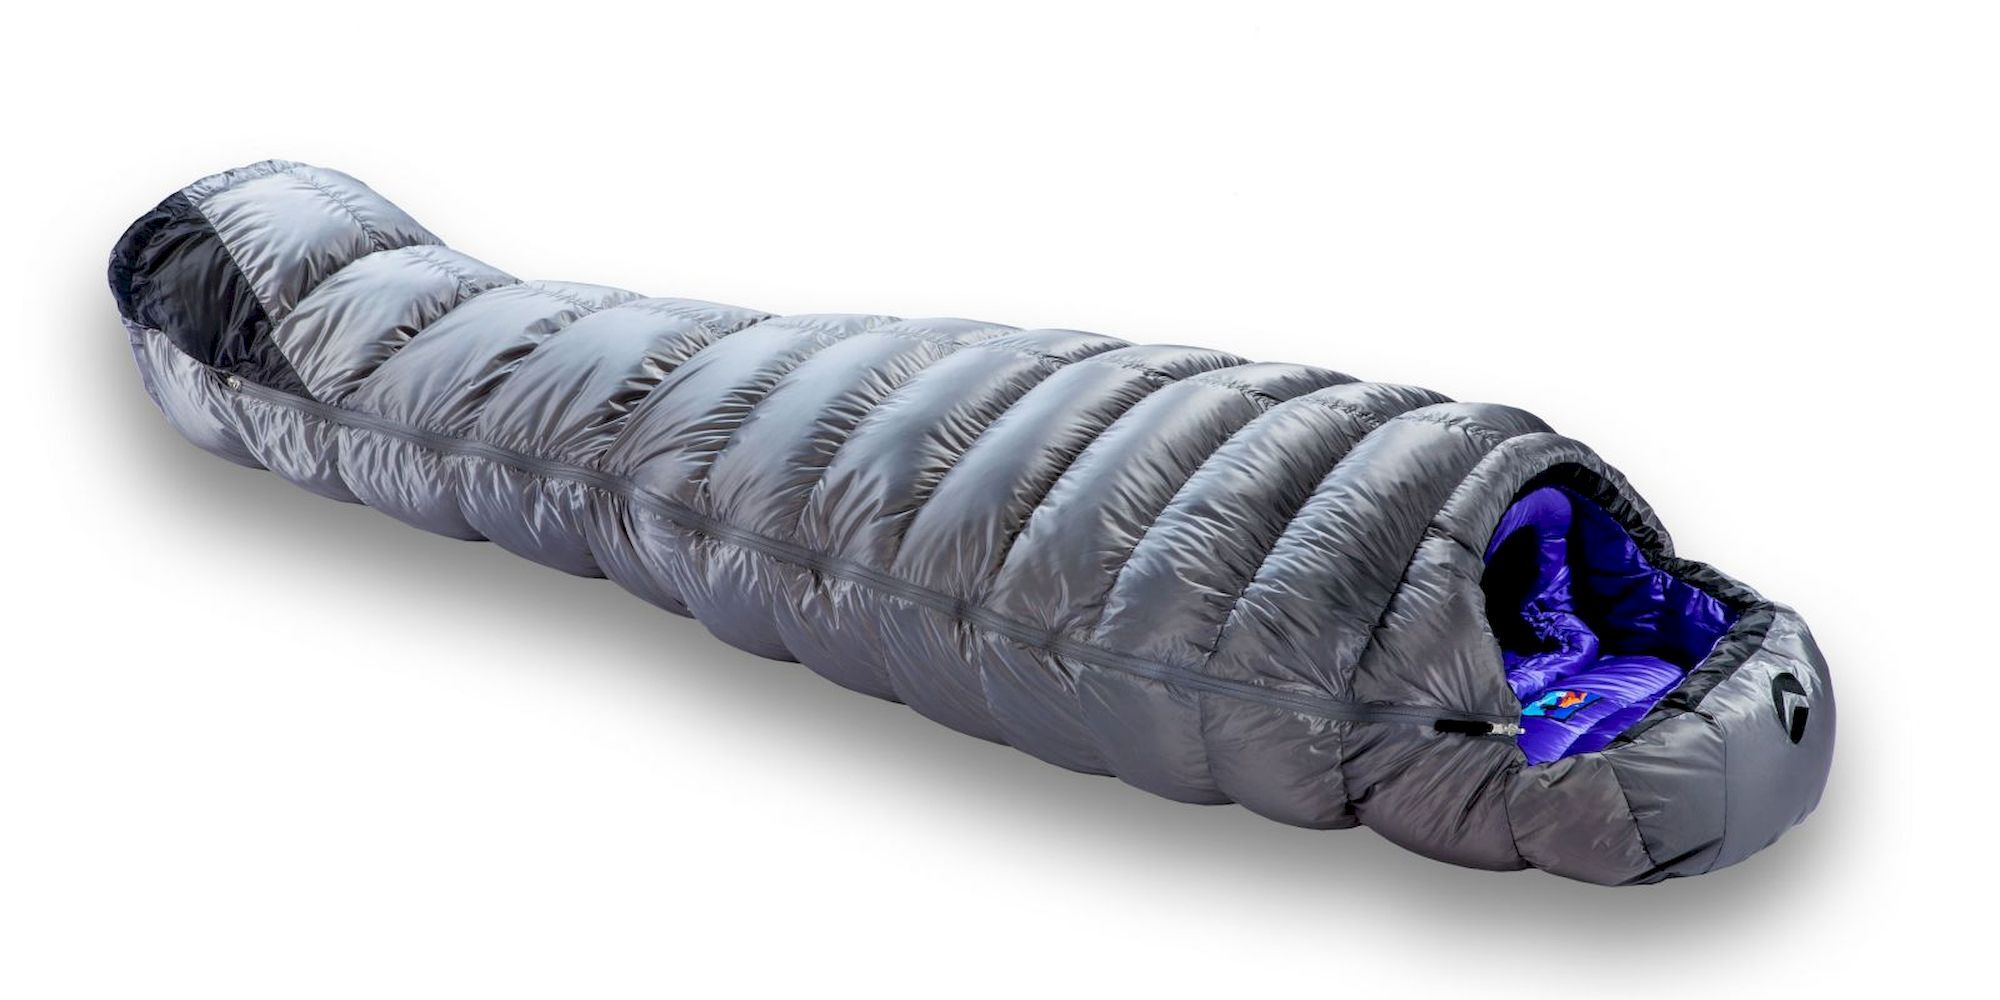 Valandré Chill Out 650 RDS - Sleeping bag | Hardloop